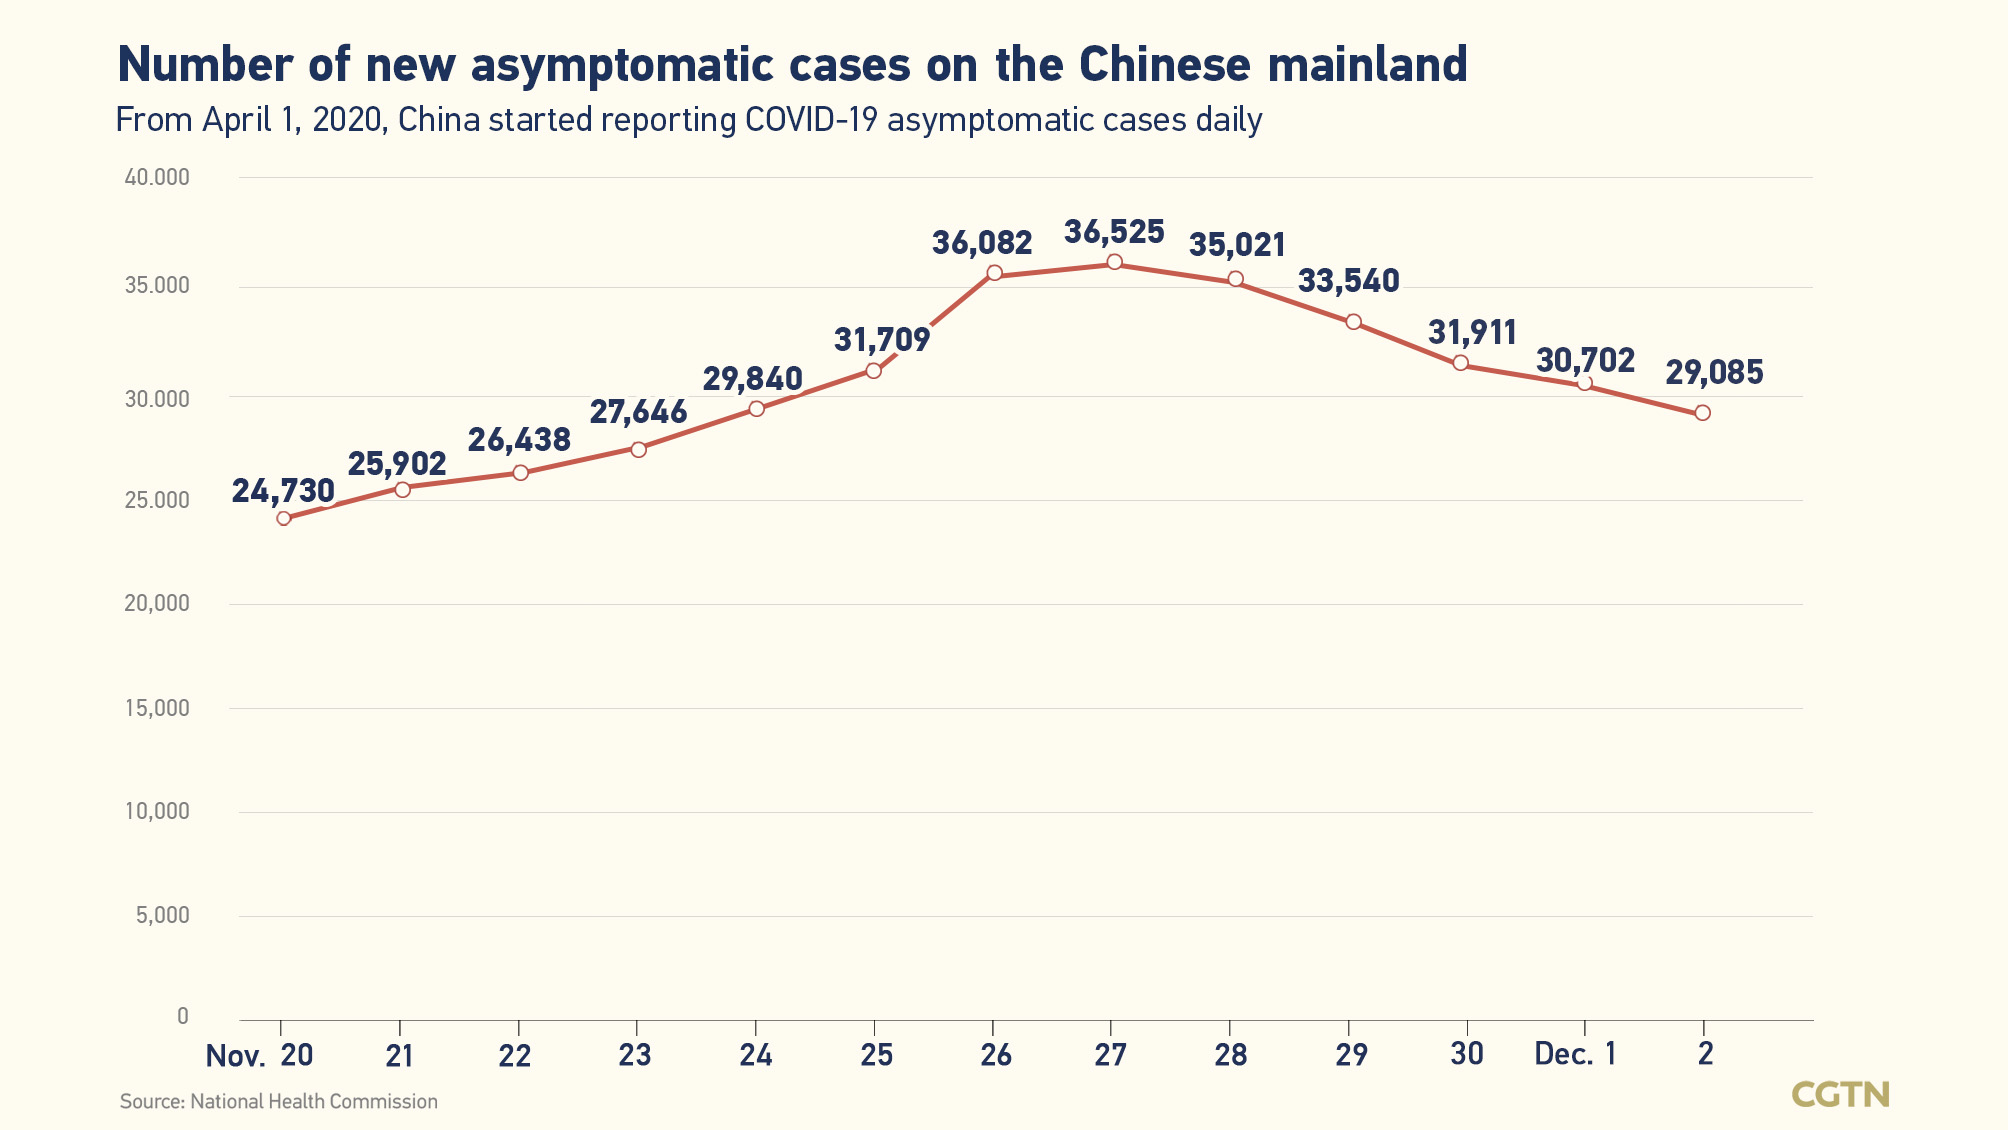 Chinese mainland records 3,988 new confirmed COVID-19 cases